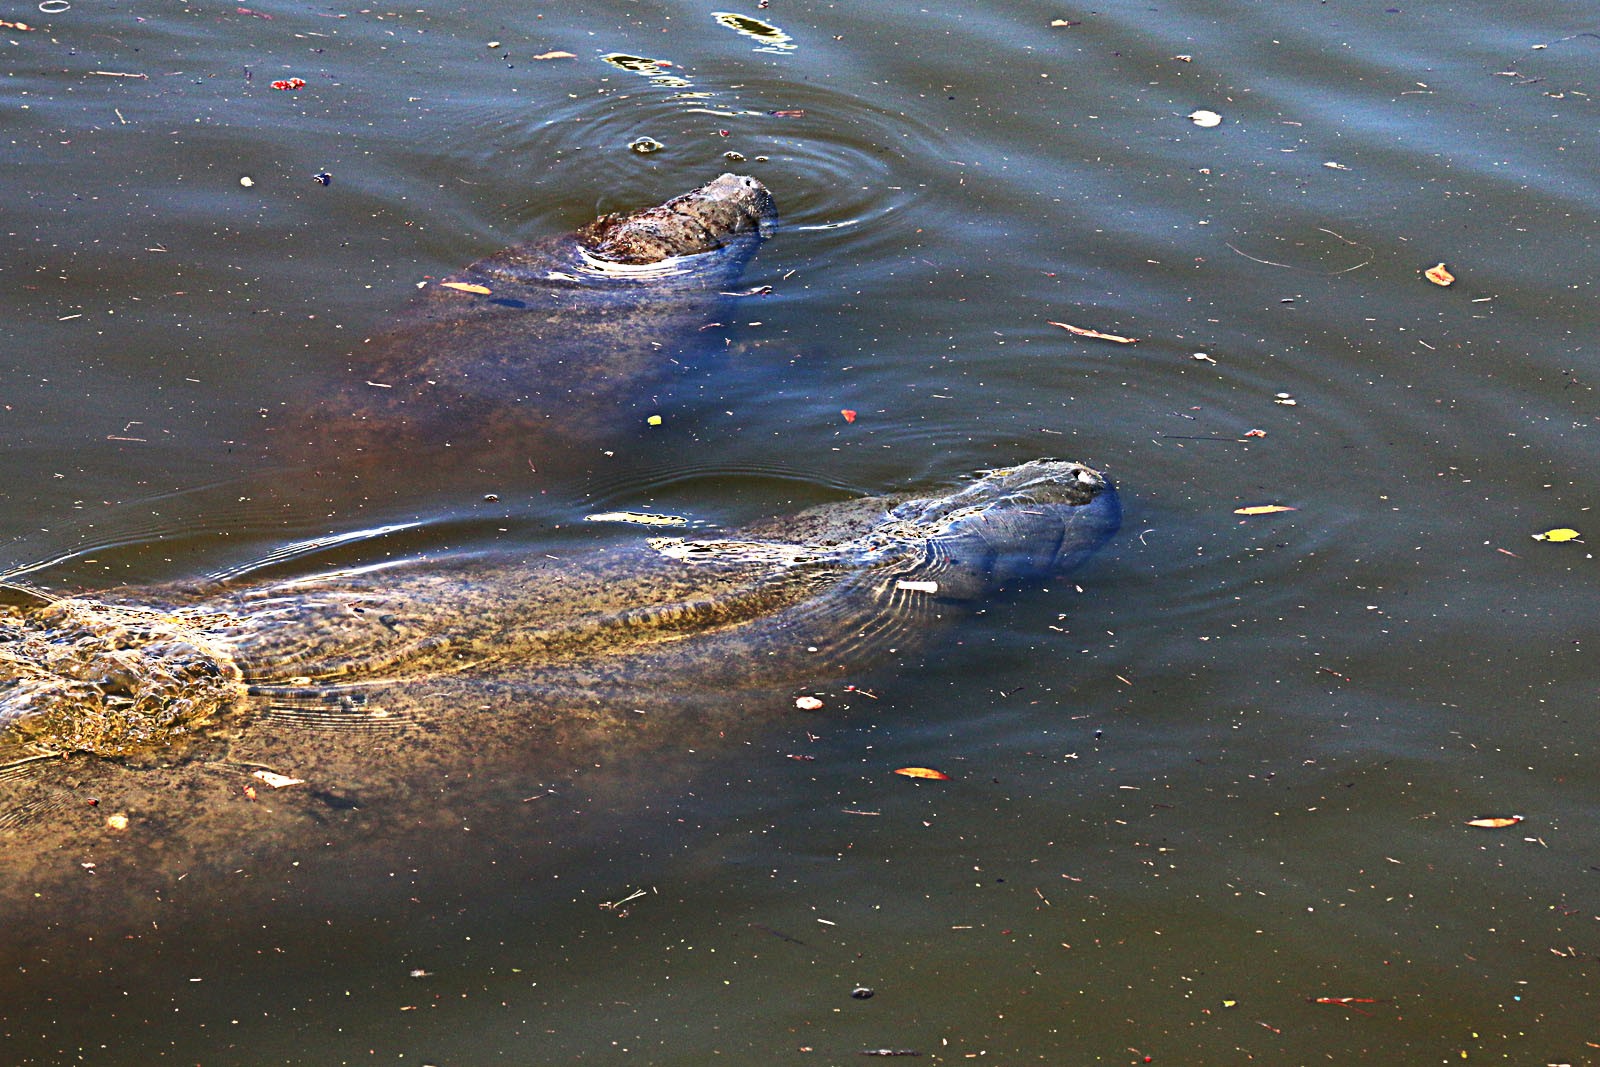 Manatee Observation and Education 